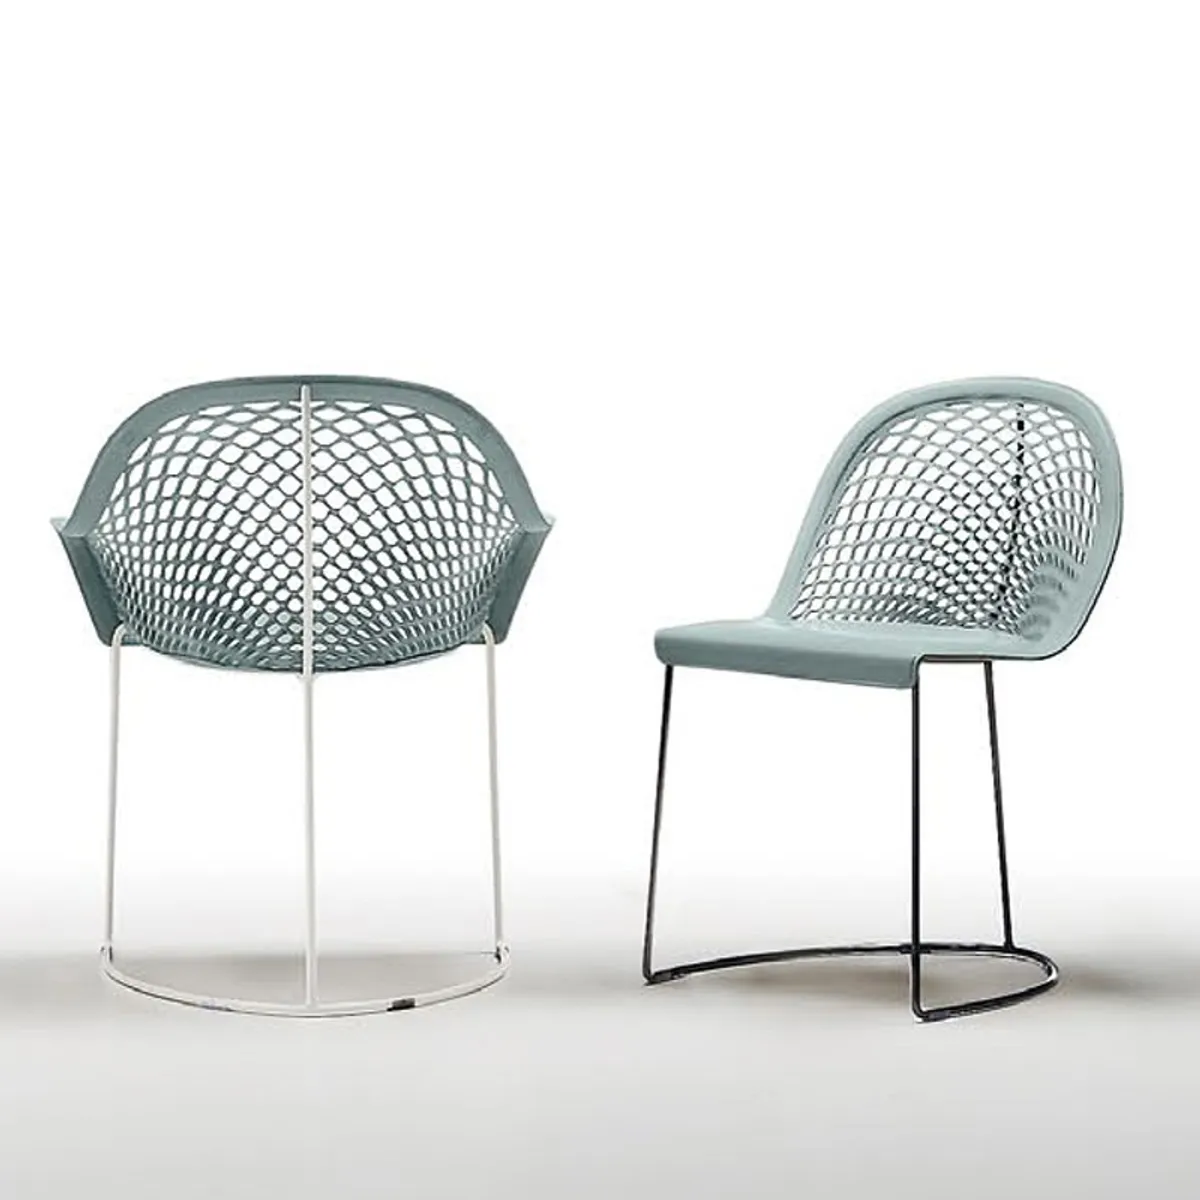 Guapa Chairs Inside Out Contracts 014